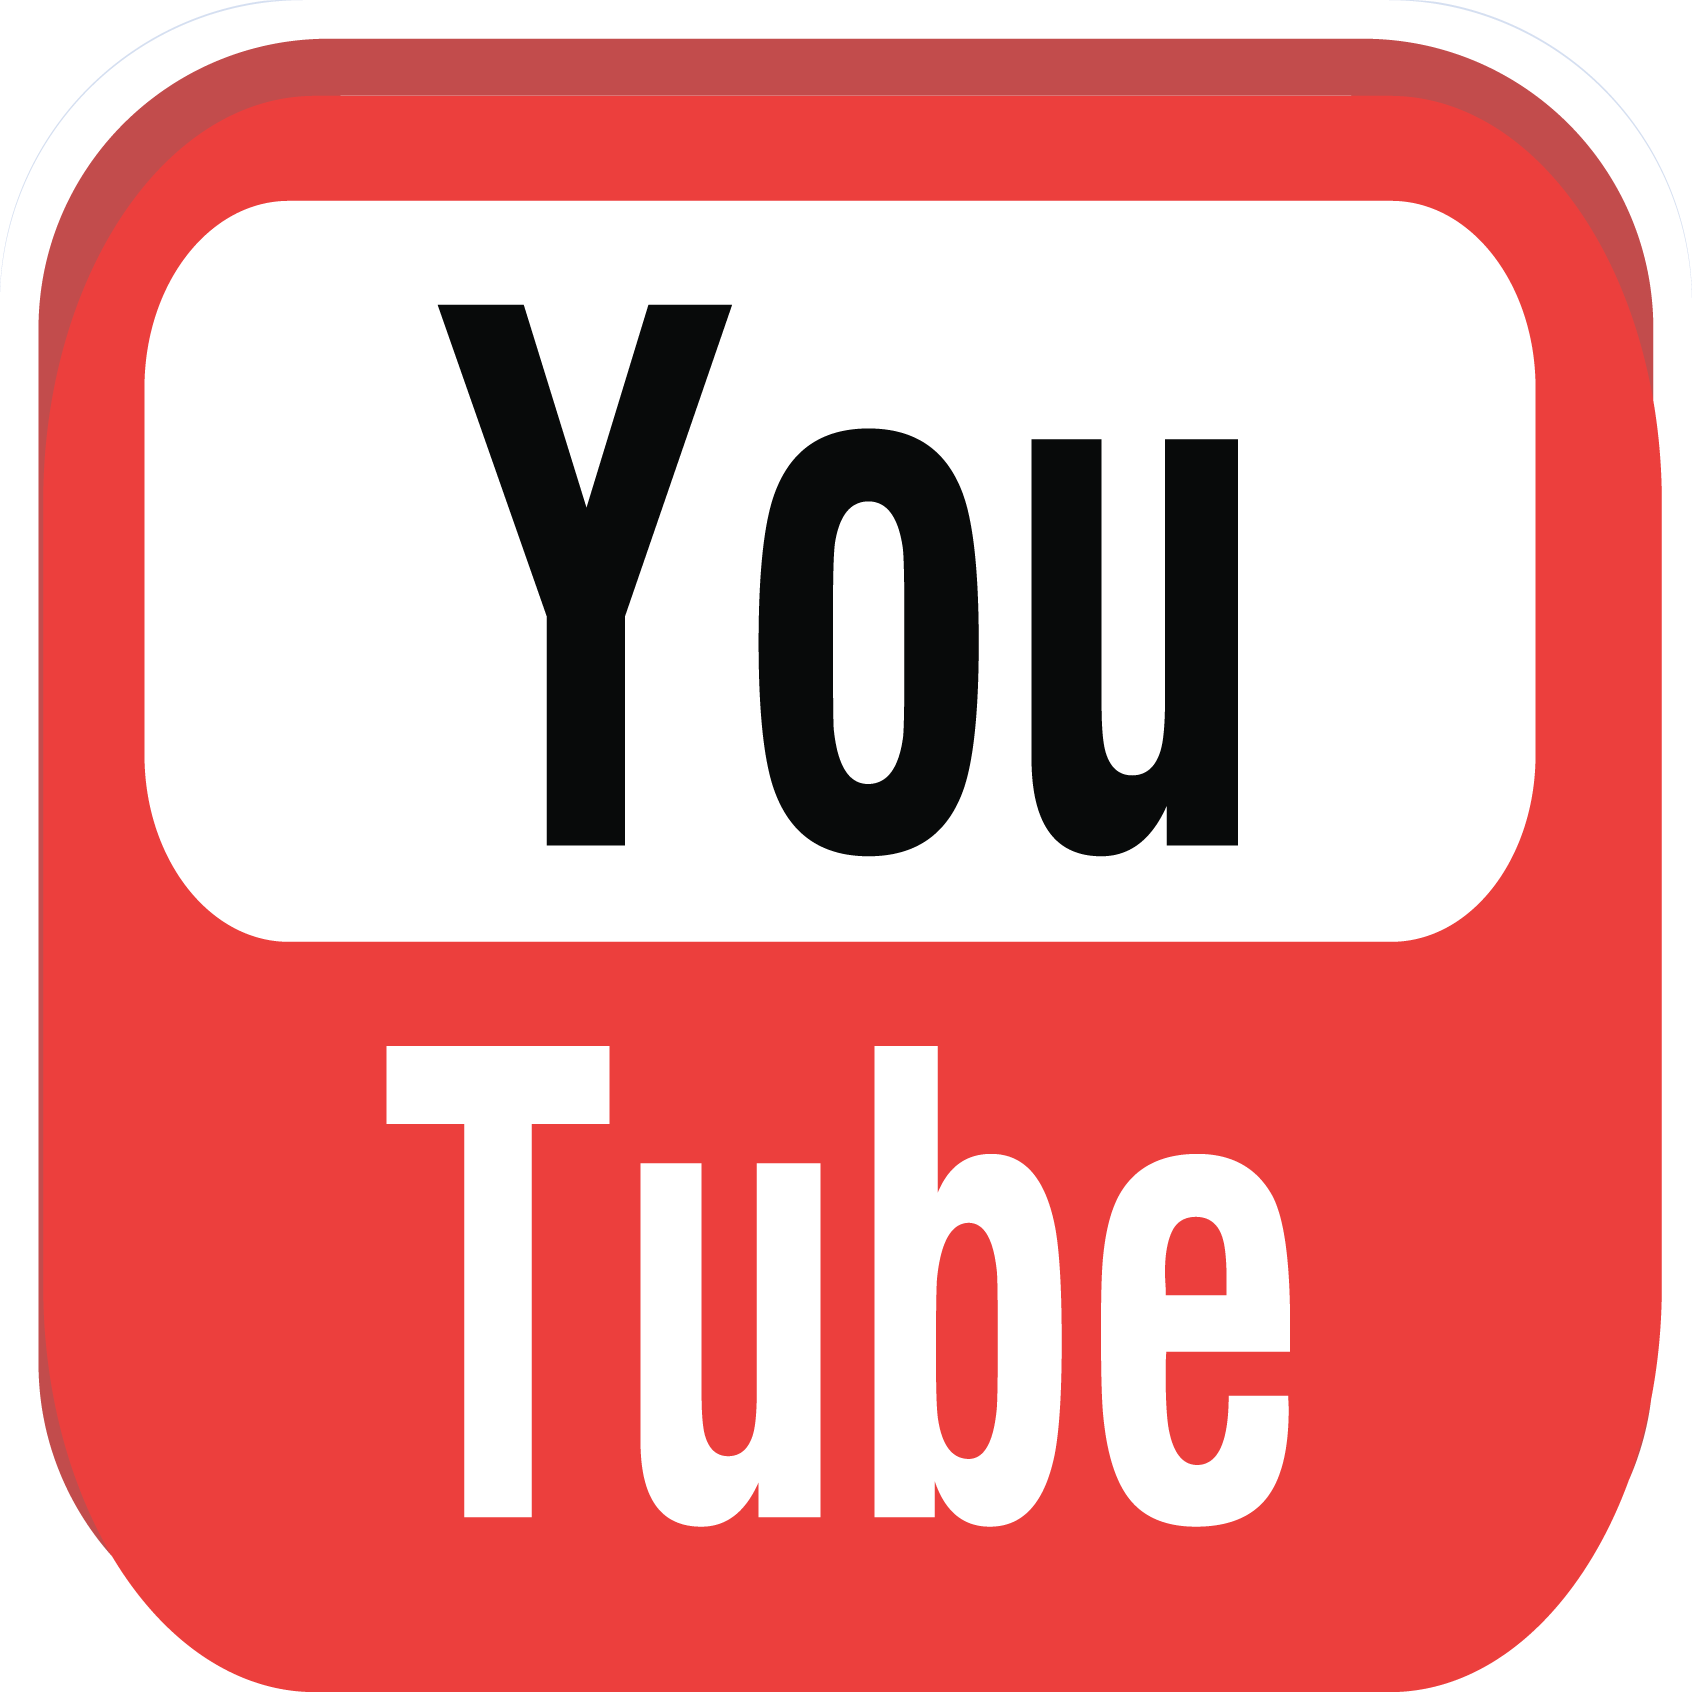 Youtube Download Png Png Image - Youtube, Transparent background PNG HD thumbnail